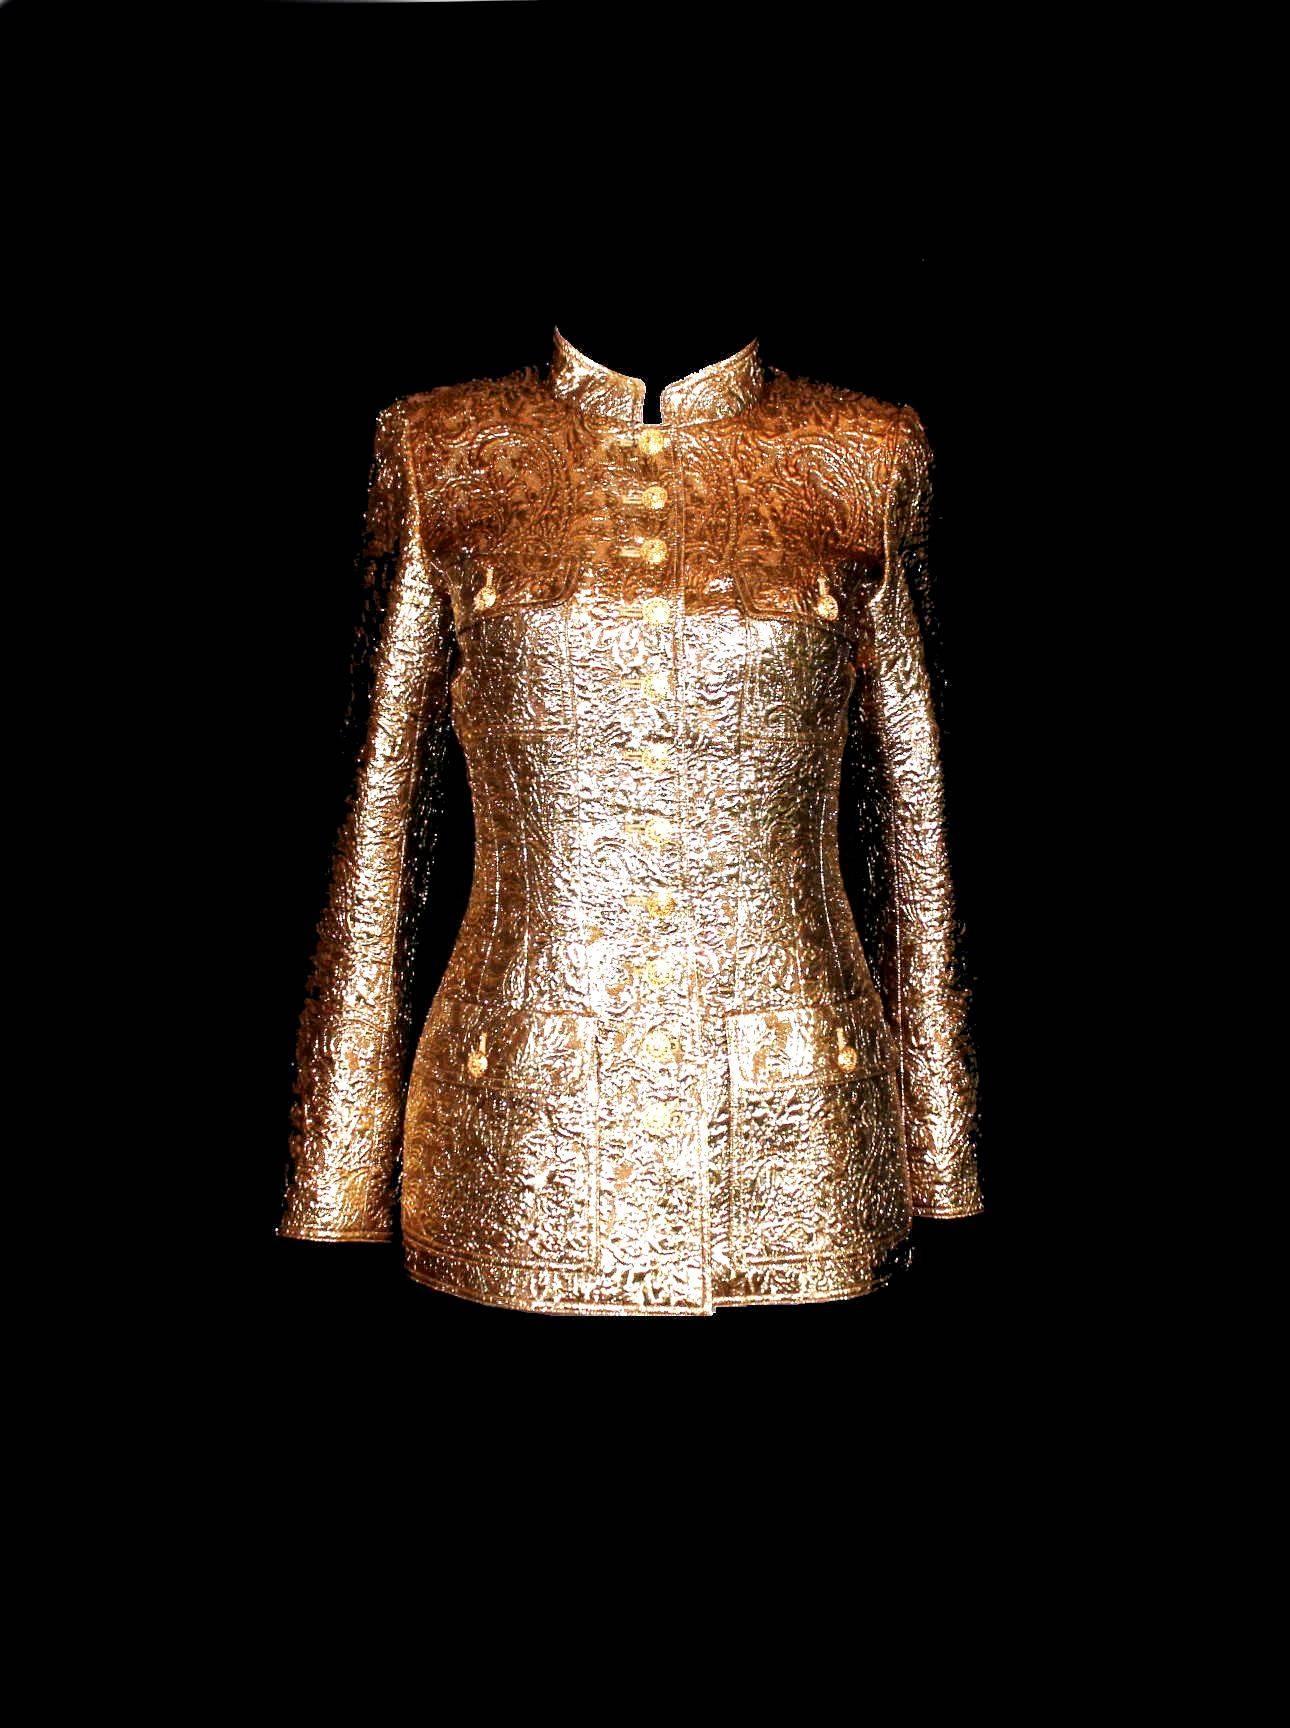 A true icon designed by Karl Lagerfeld for Chanel
AW 1996 collection
Golden metallic jacket
3D structure
Golden buttons in front and on sleeves with CC logo
Fully lined with beige CC logo silk
Seen in the Chanel exhibition in the Metropolitan Museum